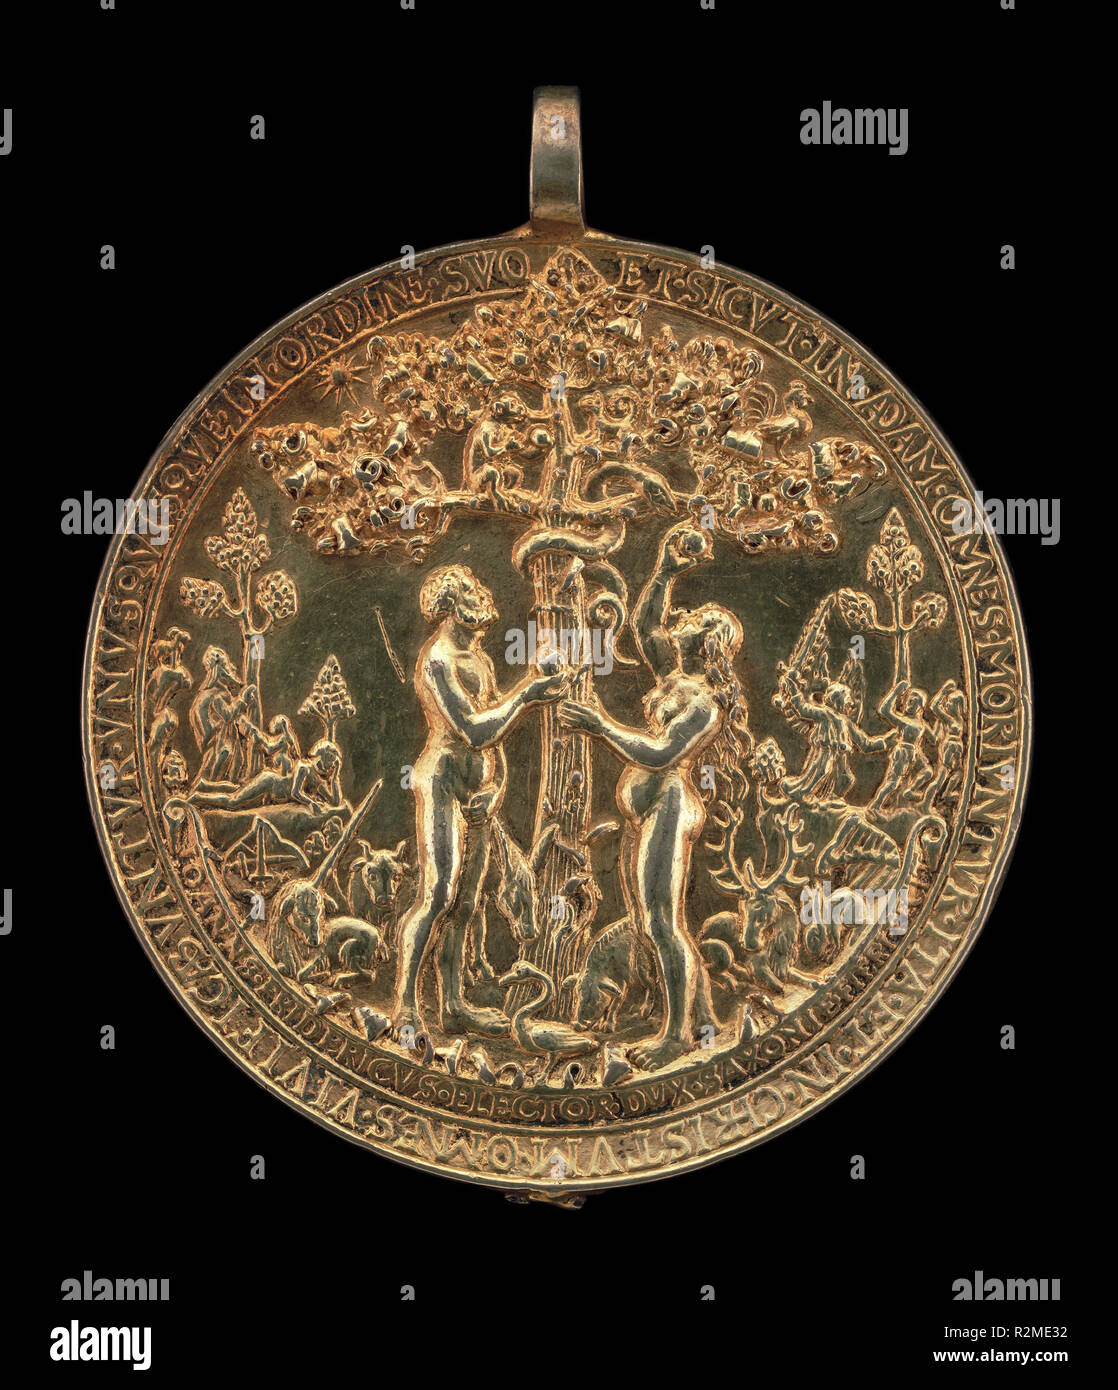 The Fall of Man [obverse]. Dated: 1536. Dimensions: overall (diameter without loop): 6.82 cm (2 11/16 in.)  overall (diameter with loop): 7.9 cm (3 1/8 in.). Medium: gilded bronze. Museum: National Gallery of Art, Washington DC. Author: Hans Reinhart the Elder. Stock Photo